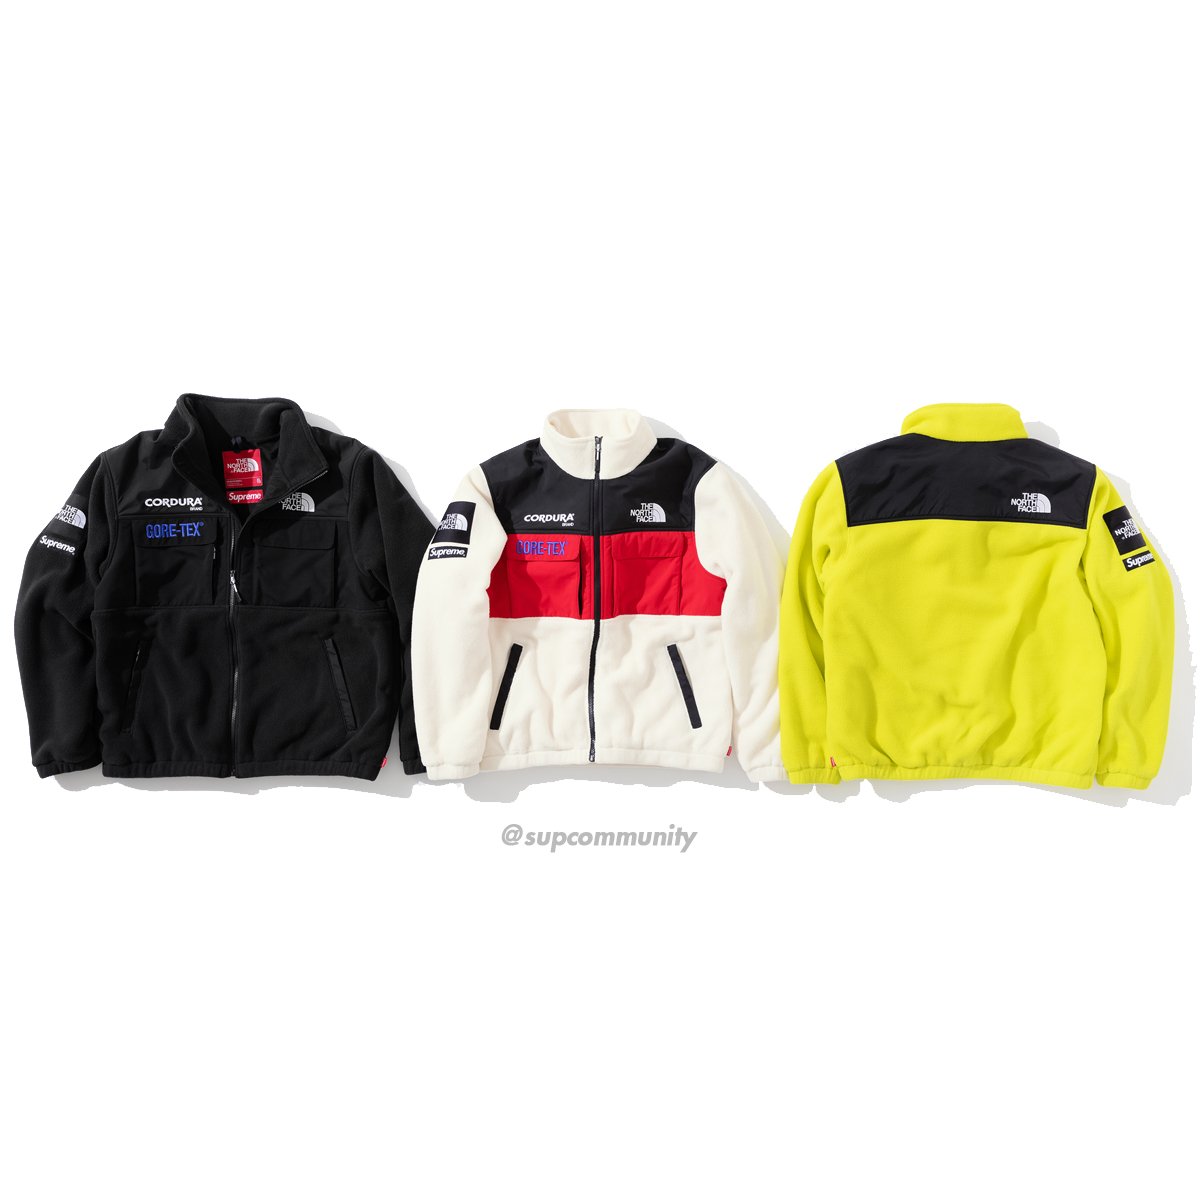 Supreme X The North Face Expedition Fleece FW18 Large